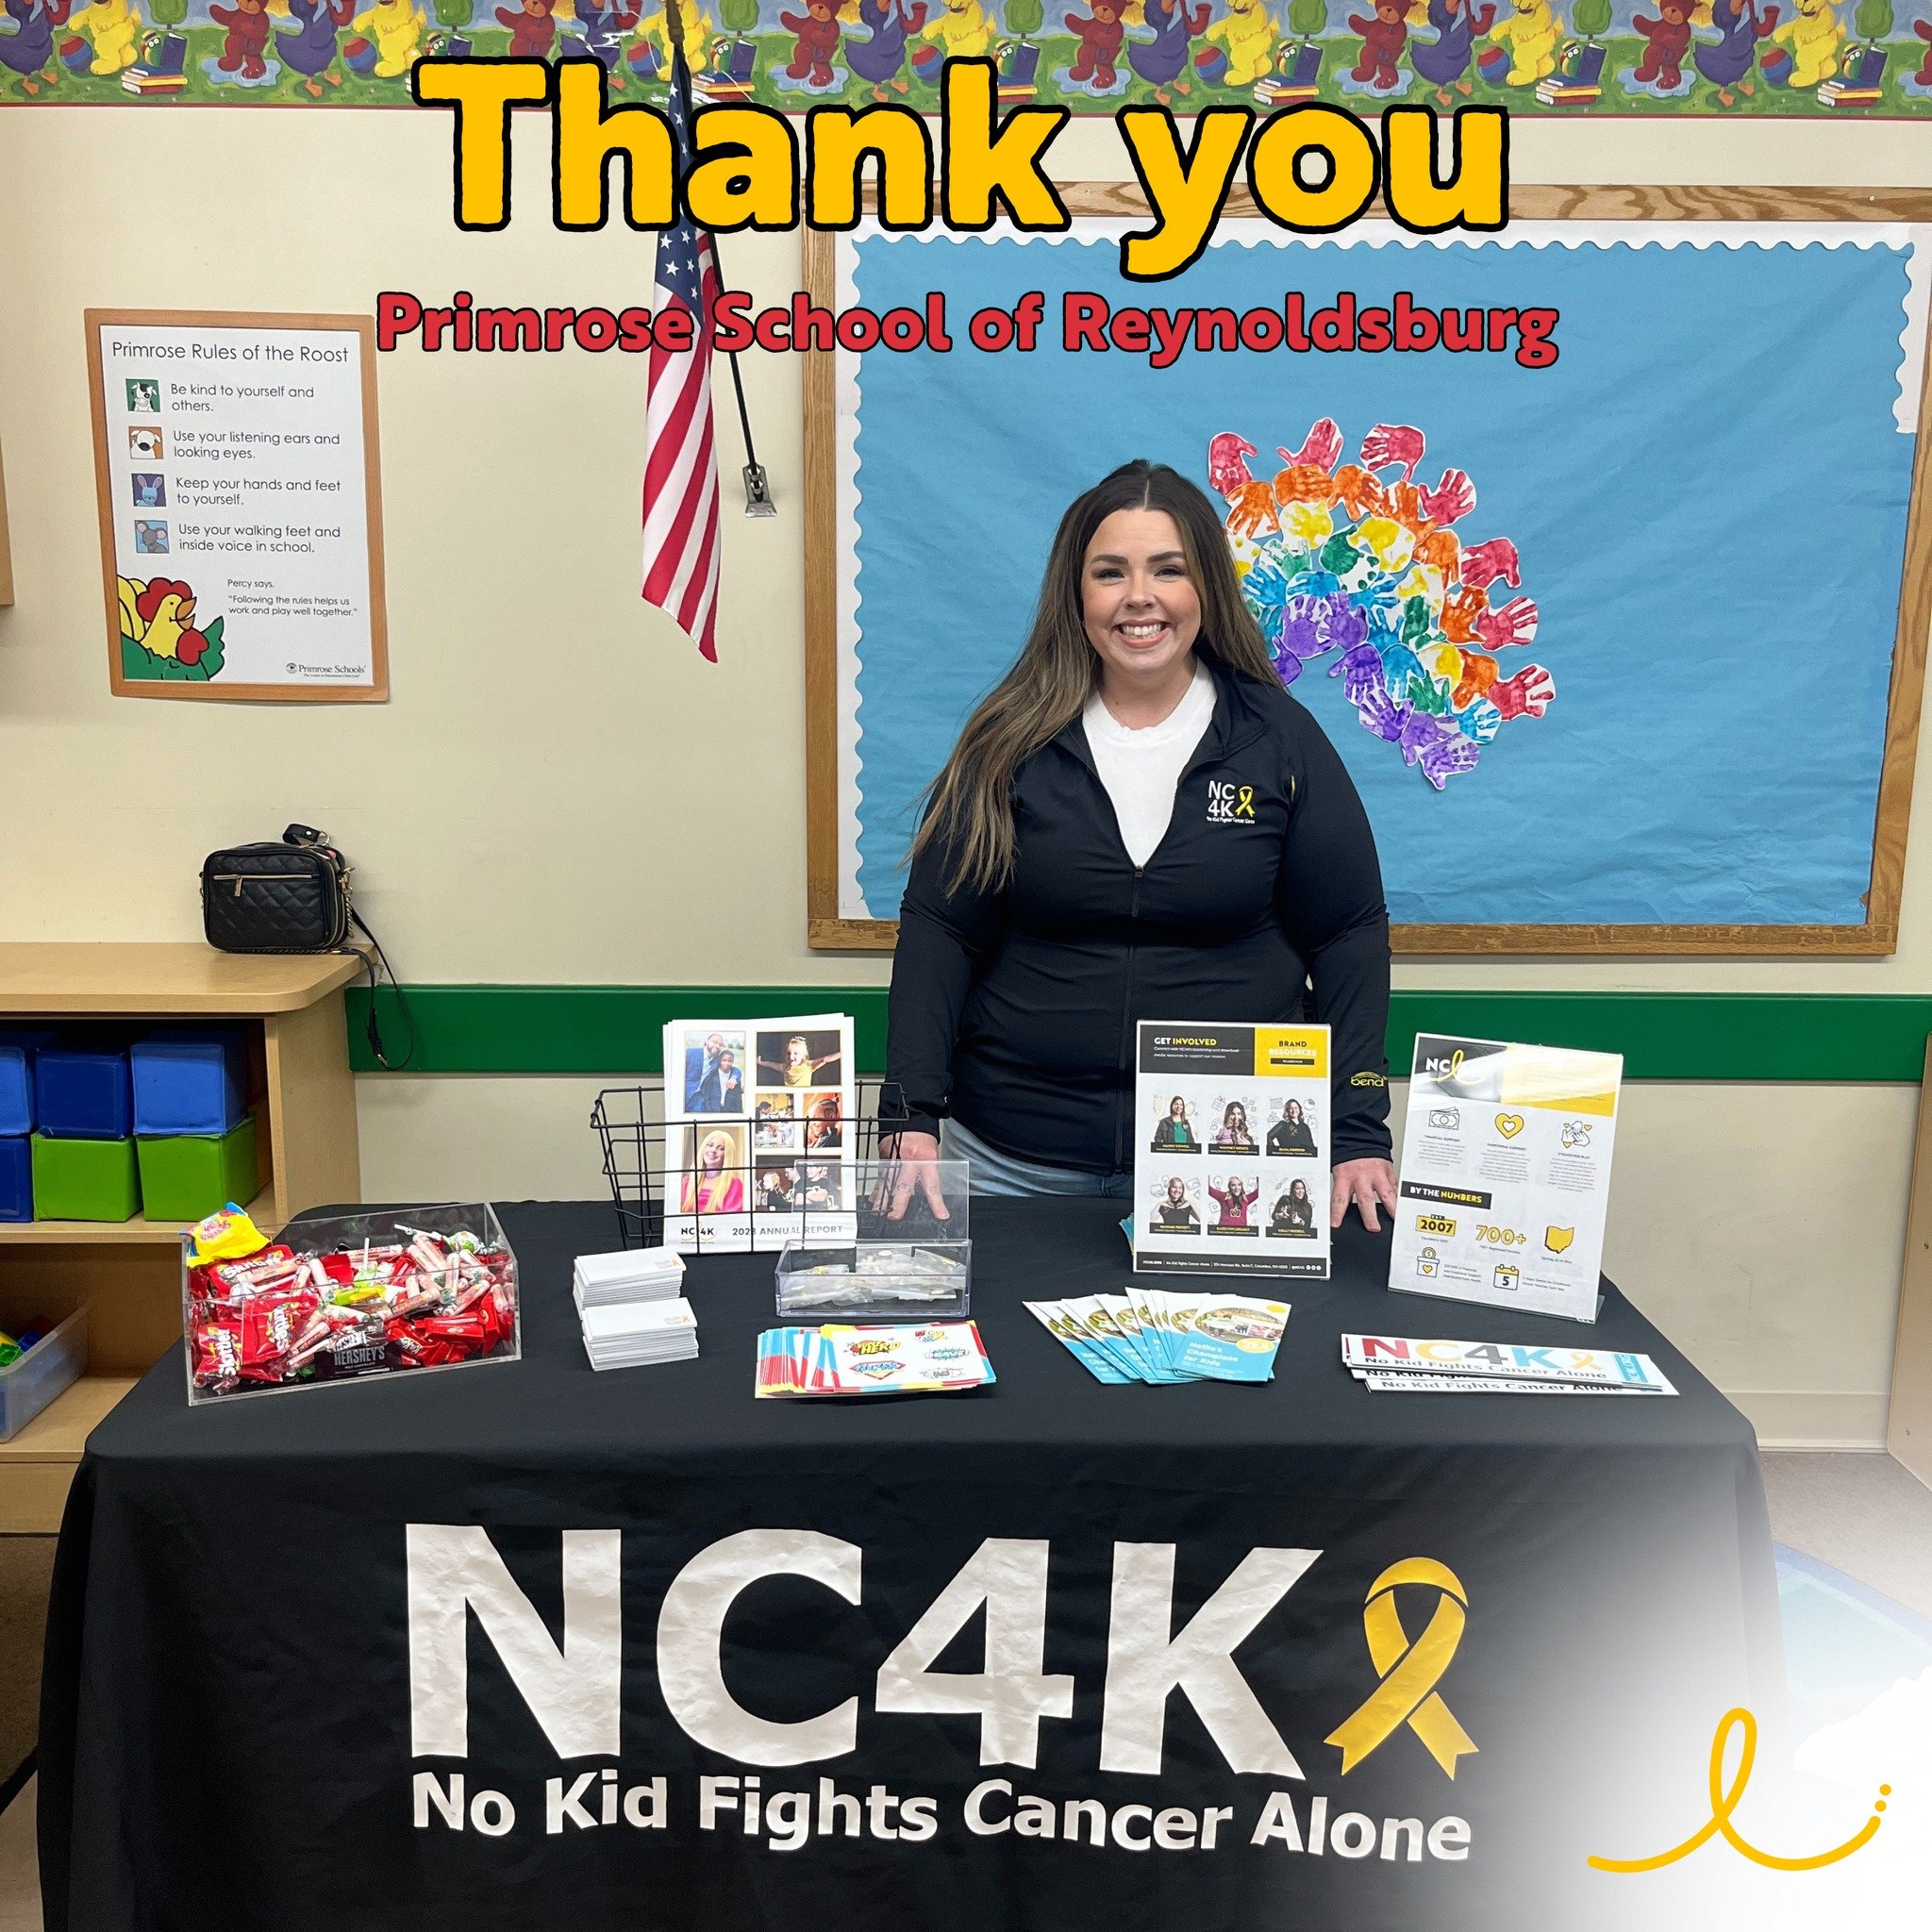 Last Friday, we were honored to attend the Primrose School of Reynoldsburg for their Spring Fling! Proceeds from the event were donated to NC4K, and we are grateful to have been chosen as the beneficiary. Thank you to Primrose School for supporting u